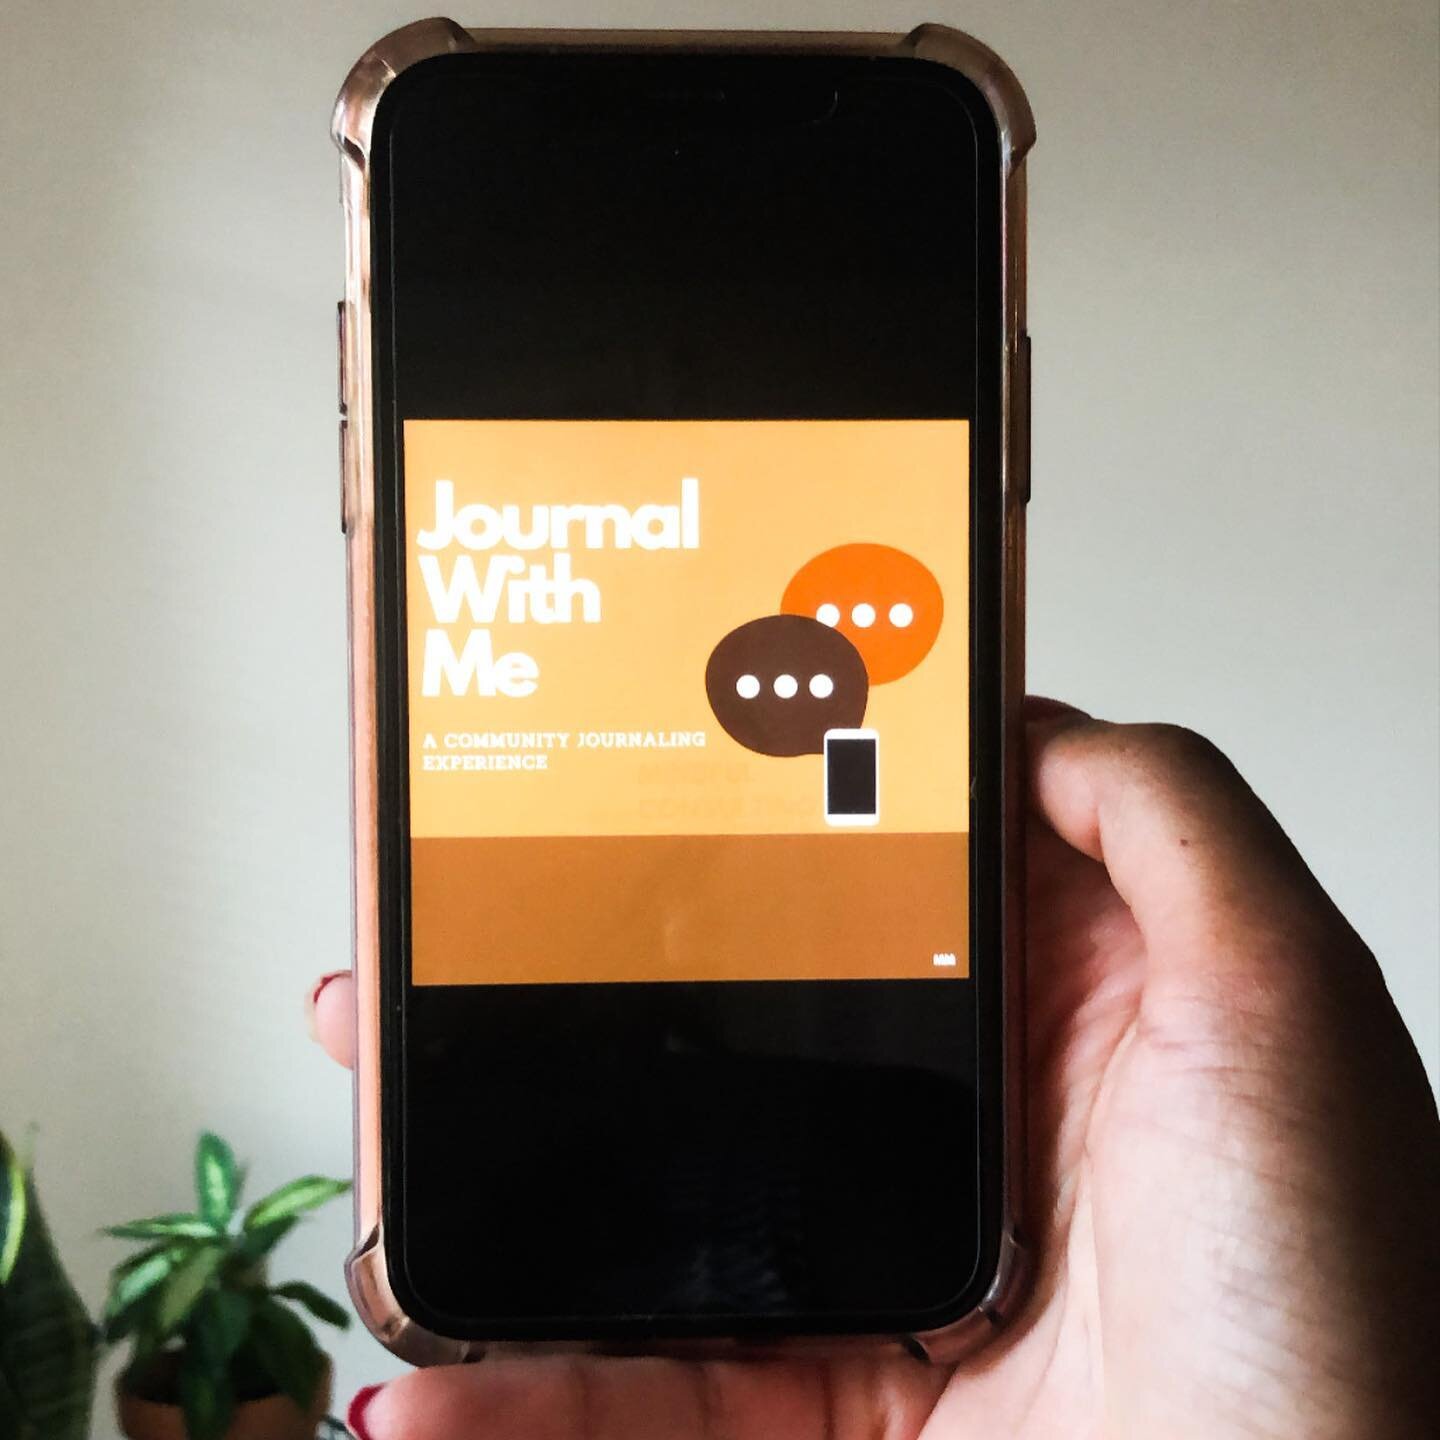 #JournalWithMe Sign up is open via the link in my bio and will close tomorrow at 12:00pm! Last month&rsquo;s #JWM experience was amazing. SWIPE to view some testimonies. 

Now, more than ever, I think it&rsquo;s important for us to intentionally make